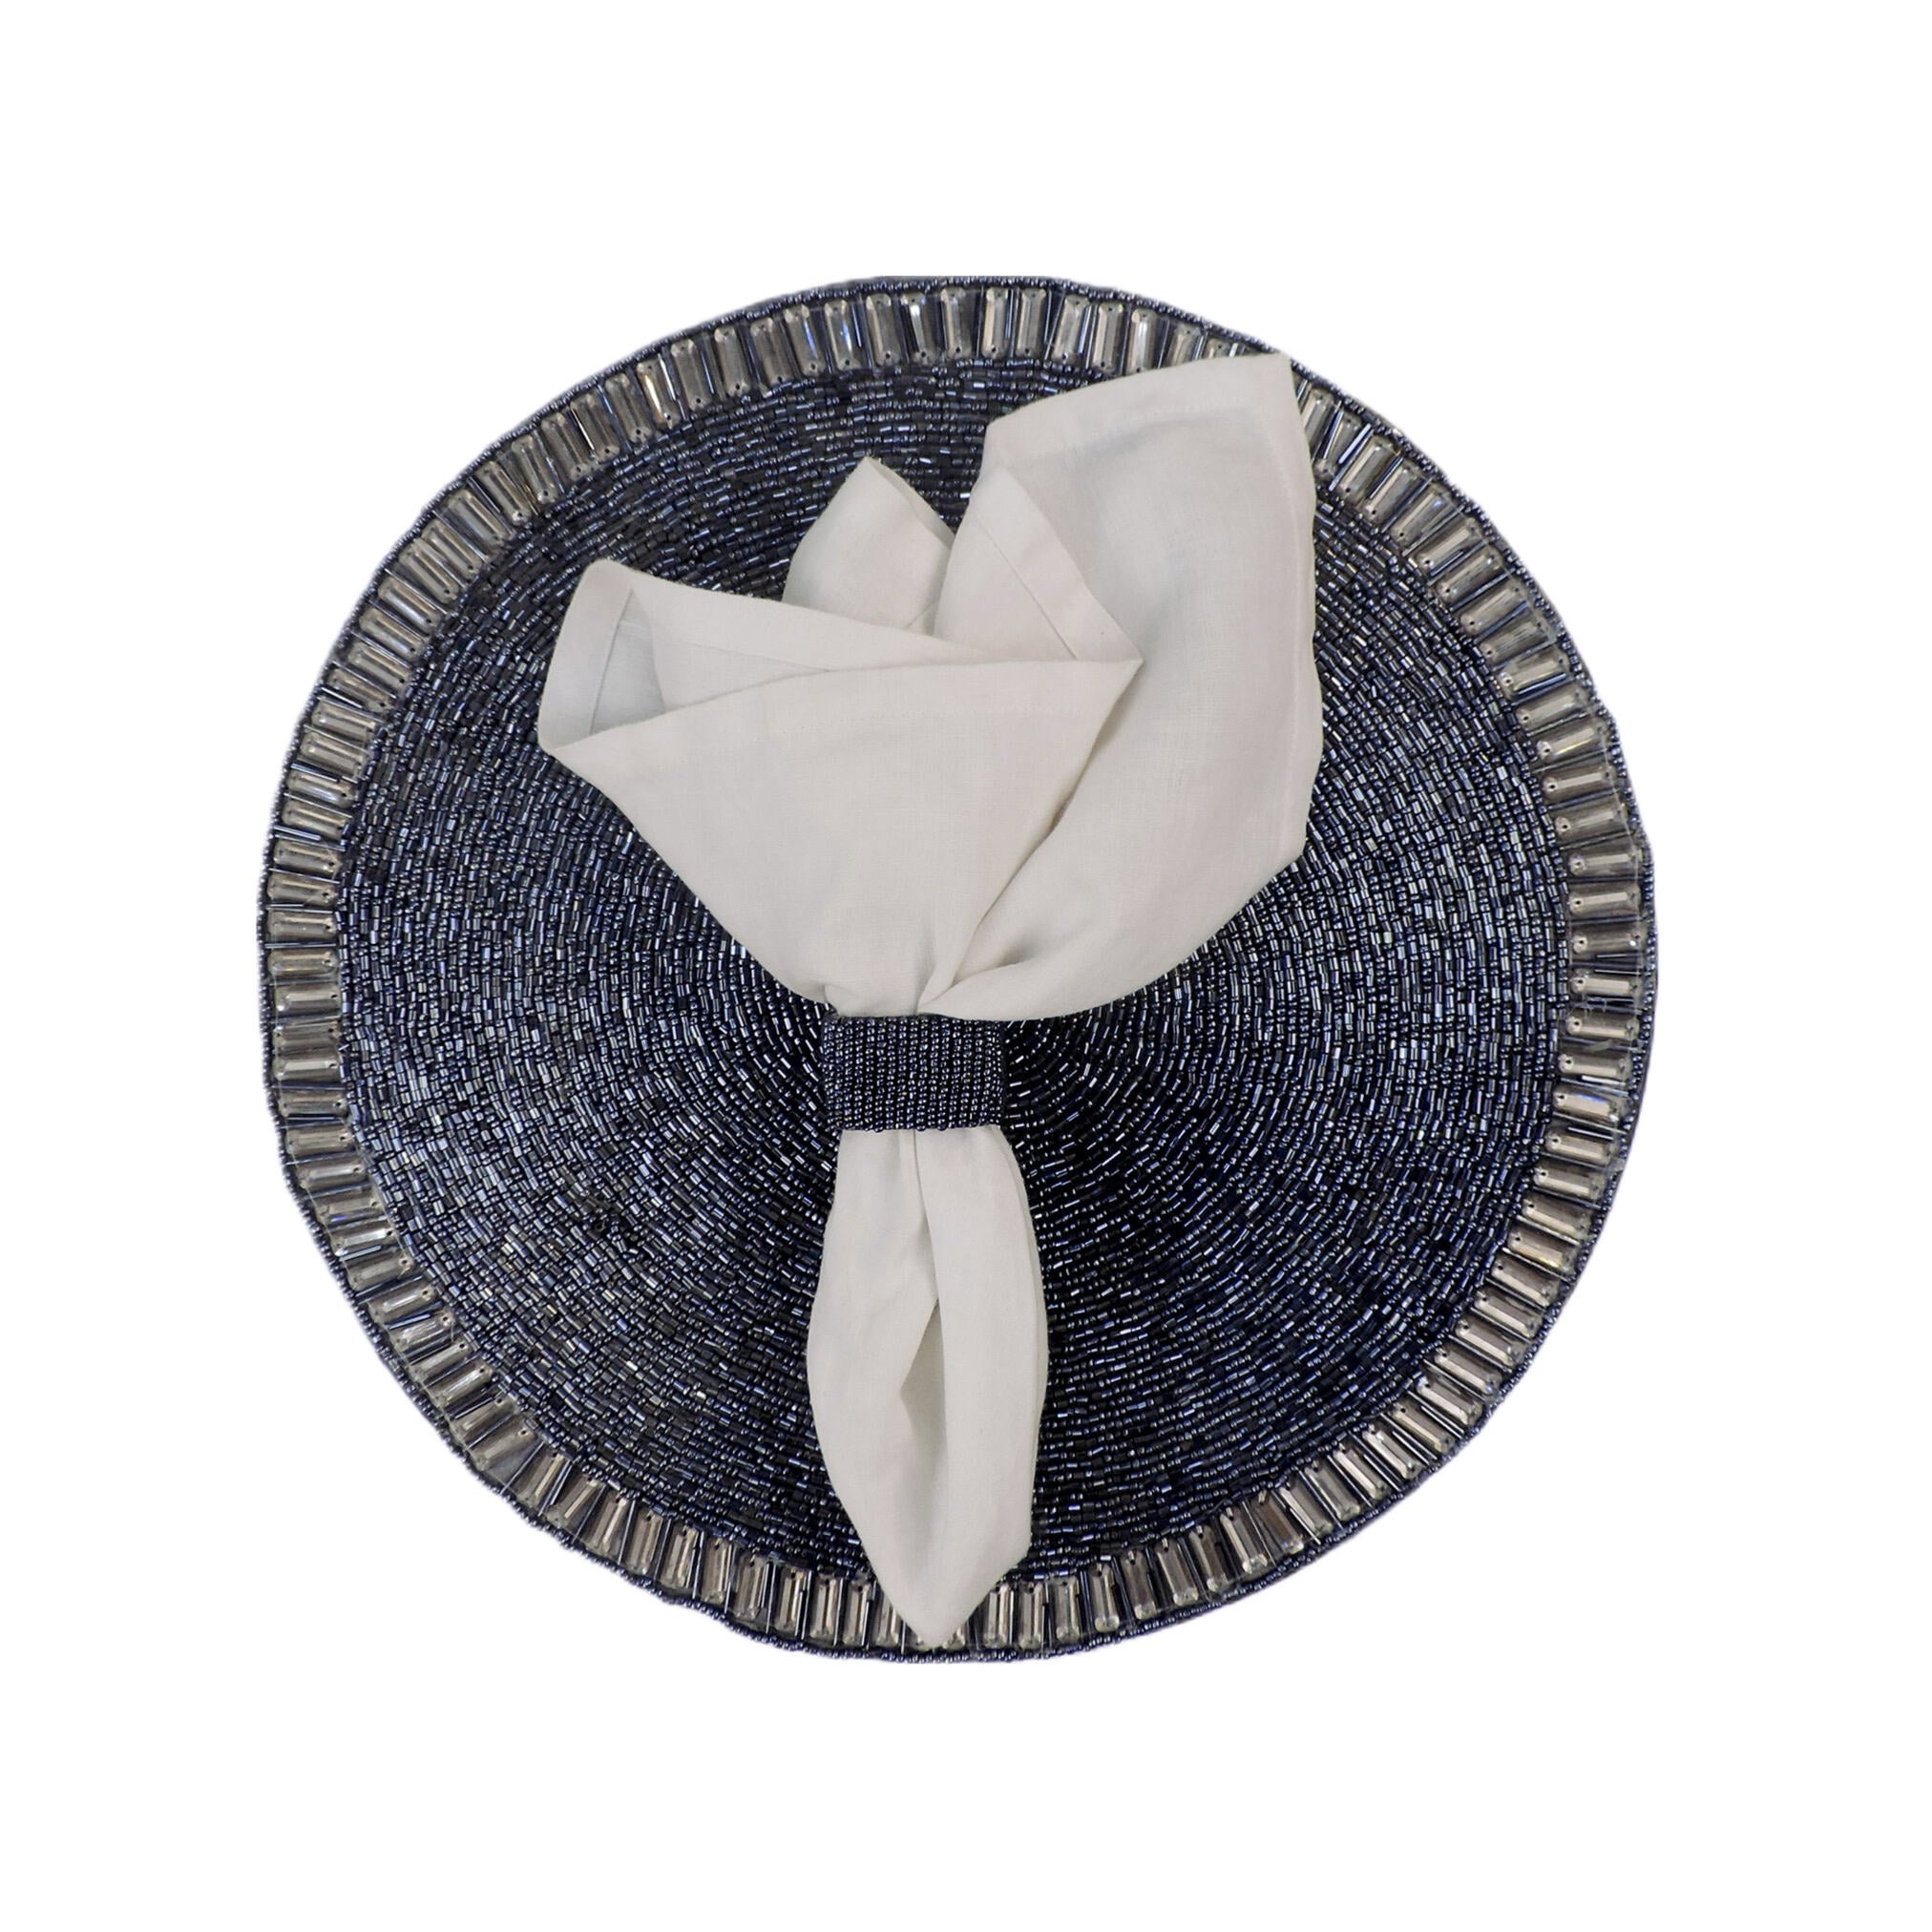 Glam Crystal Bead Embroidered Placemat in Luster Blue, Set of 2/4